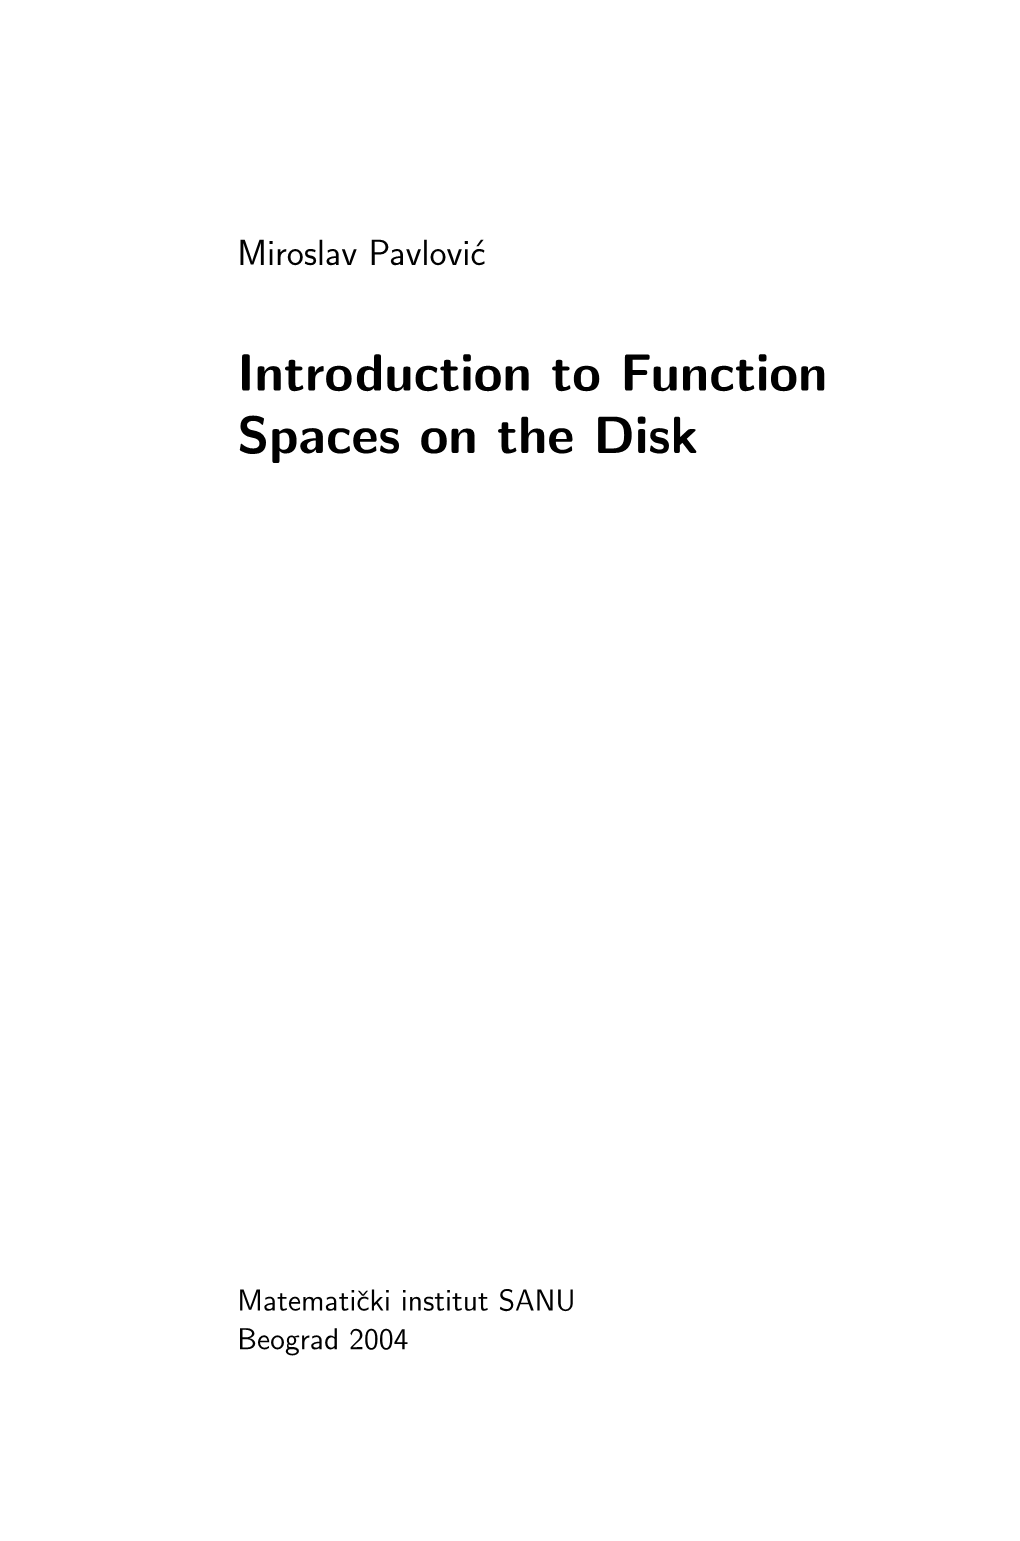 Introduction to Function Spaces on the Disk